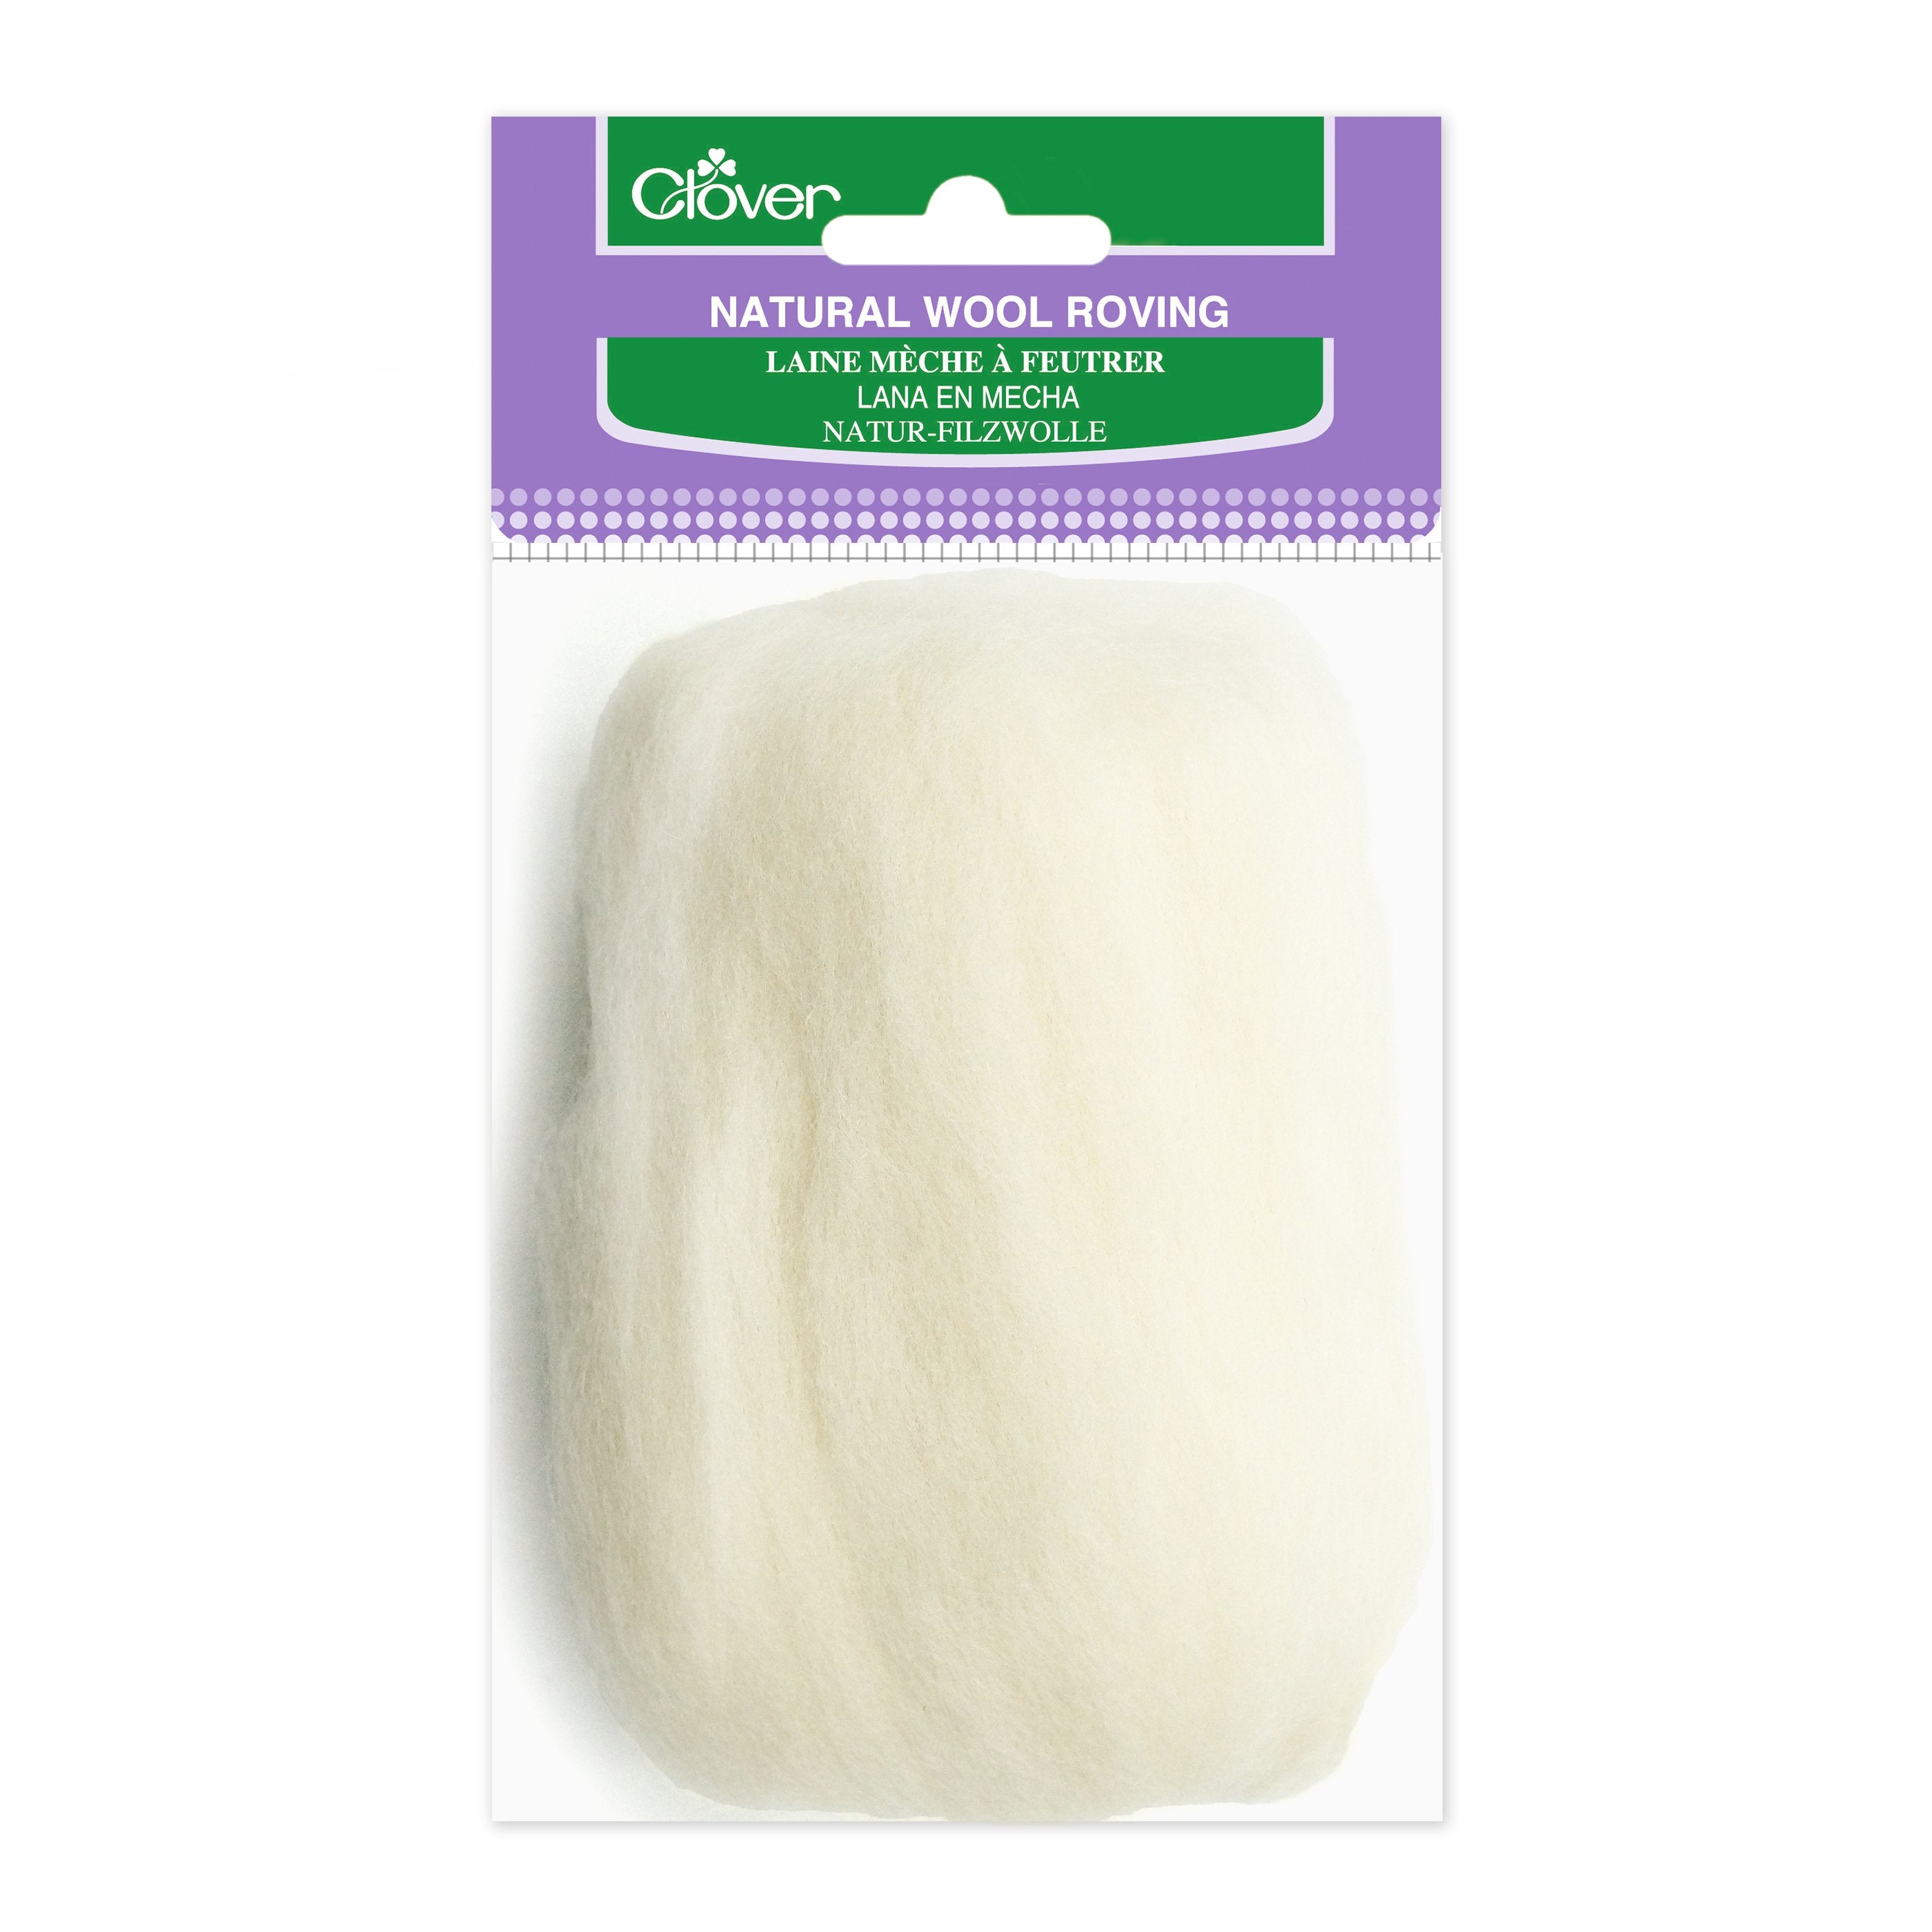  Clover Natural Wool Roving, Off White - 7920 : Arts